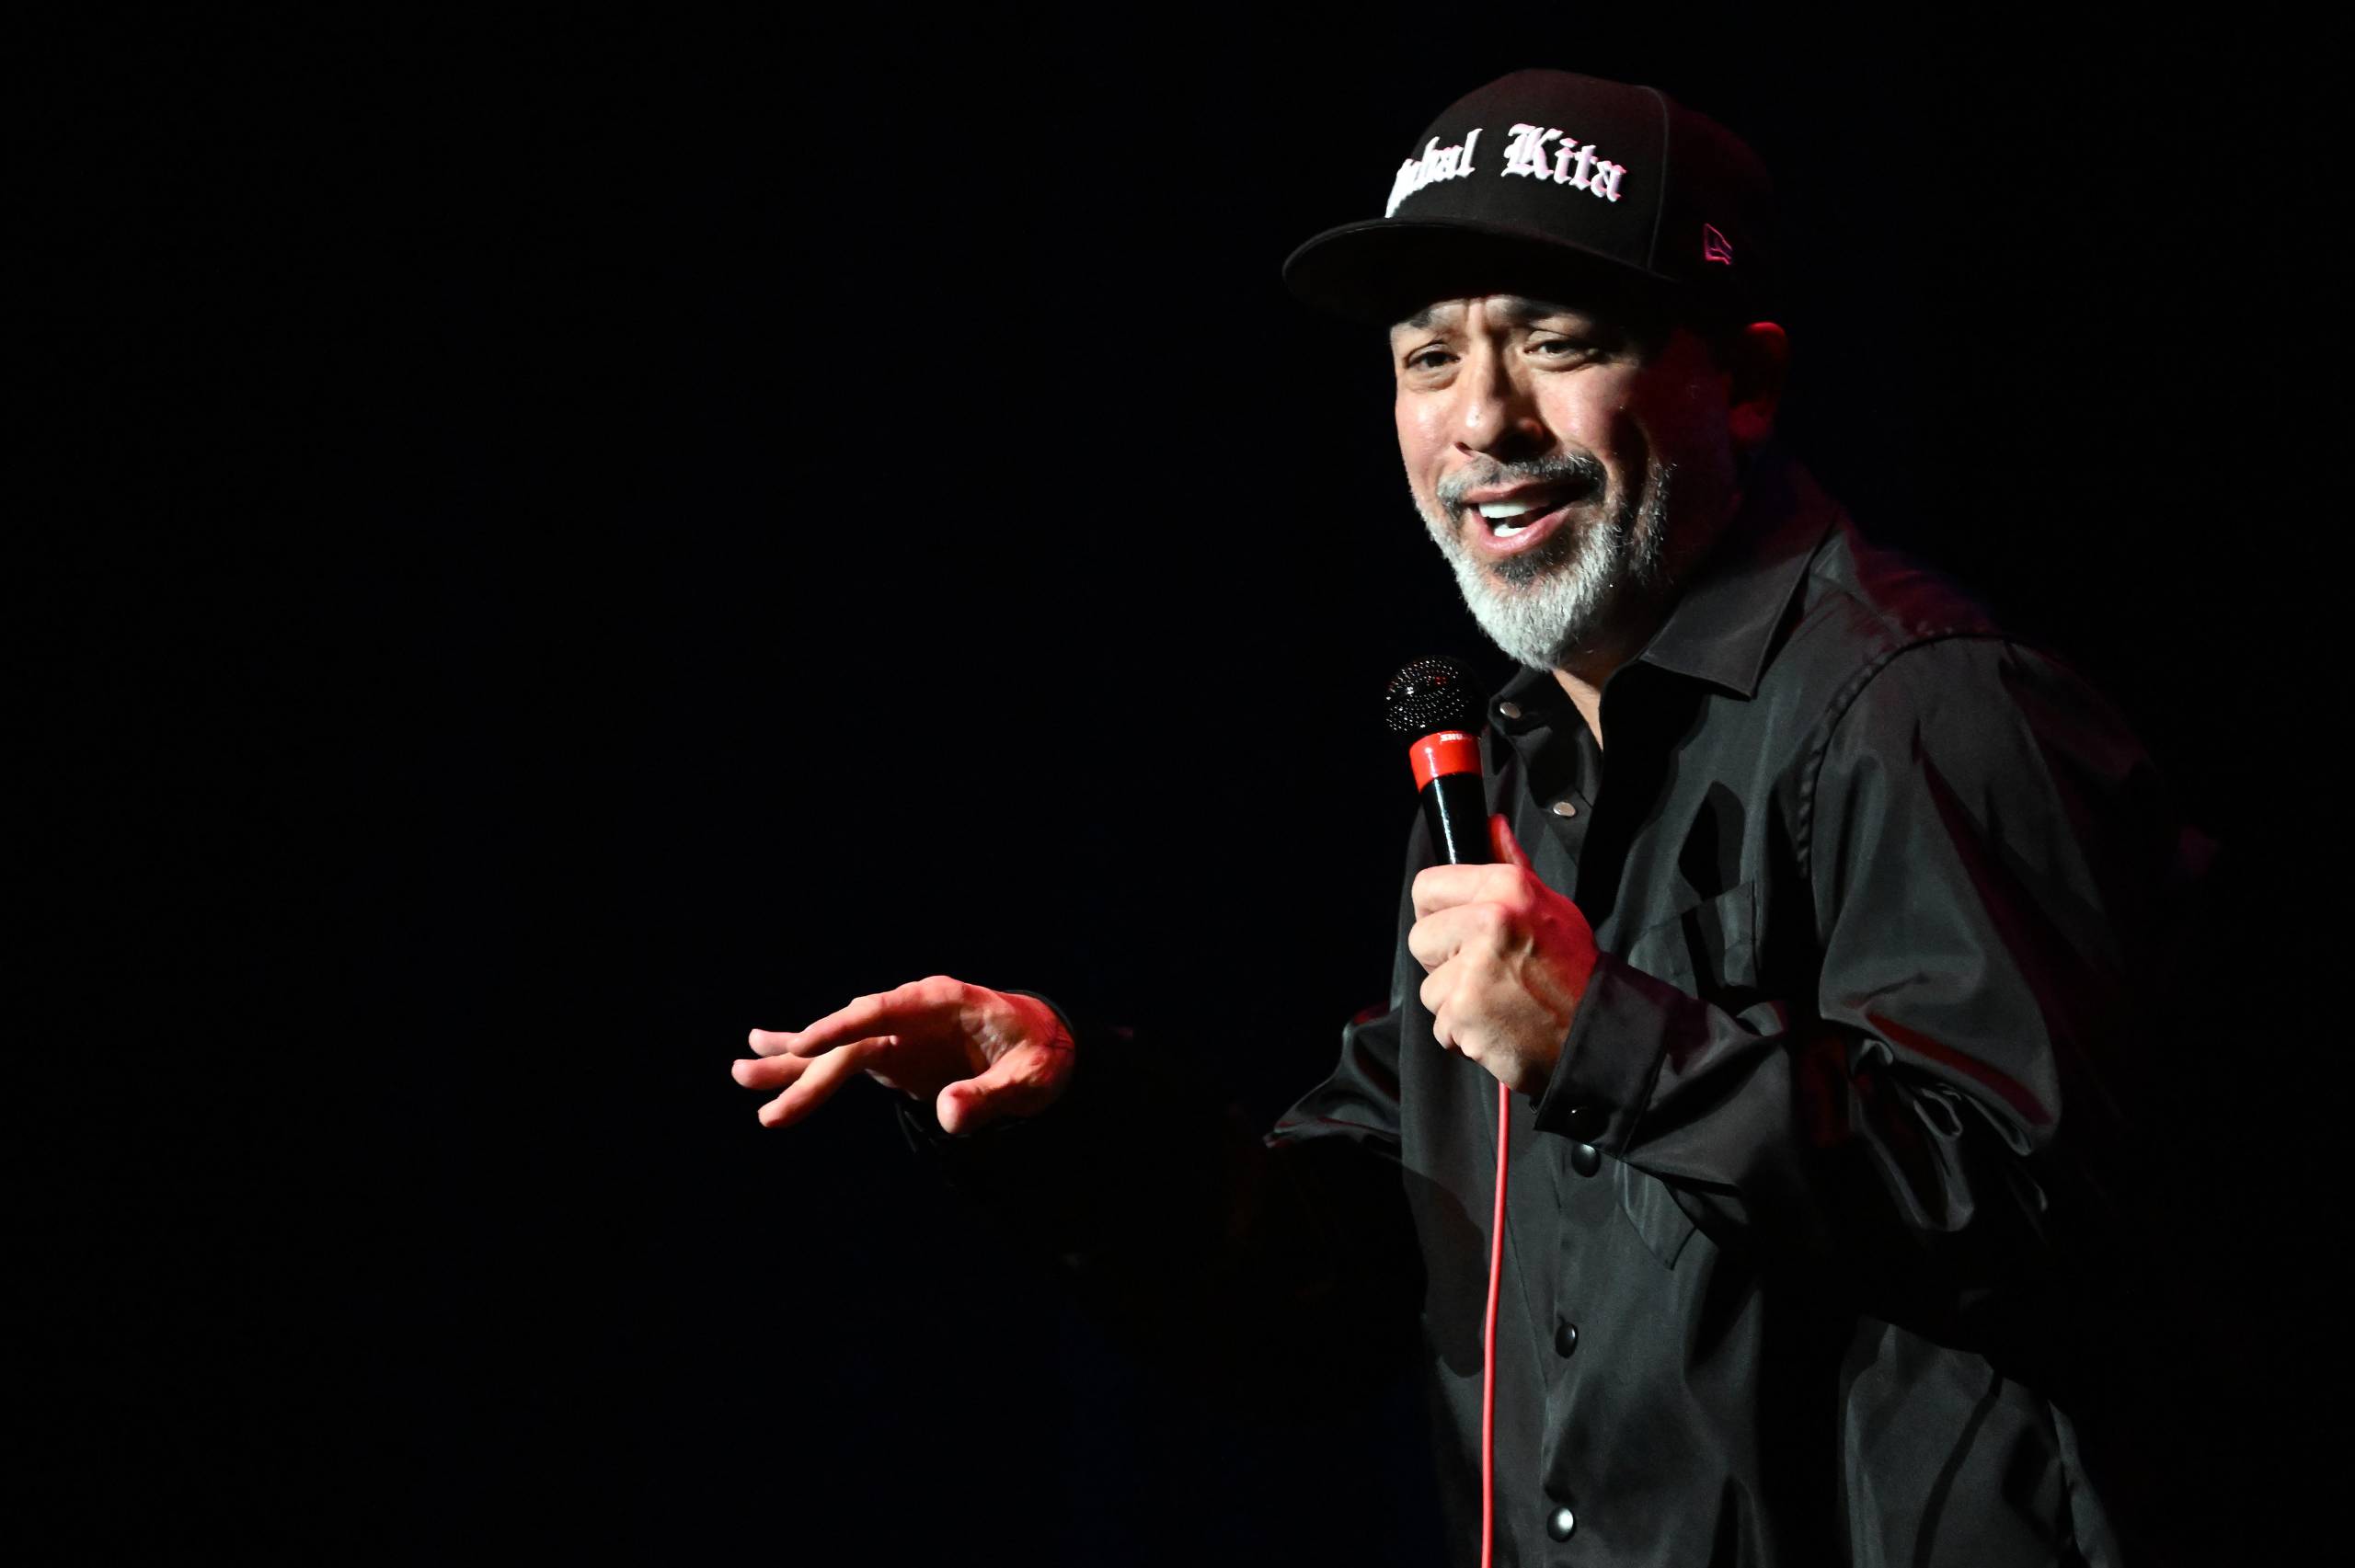 A man wearing all black and a baseball cap talks into a microphone onstage in a dark room.